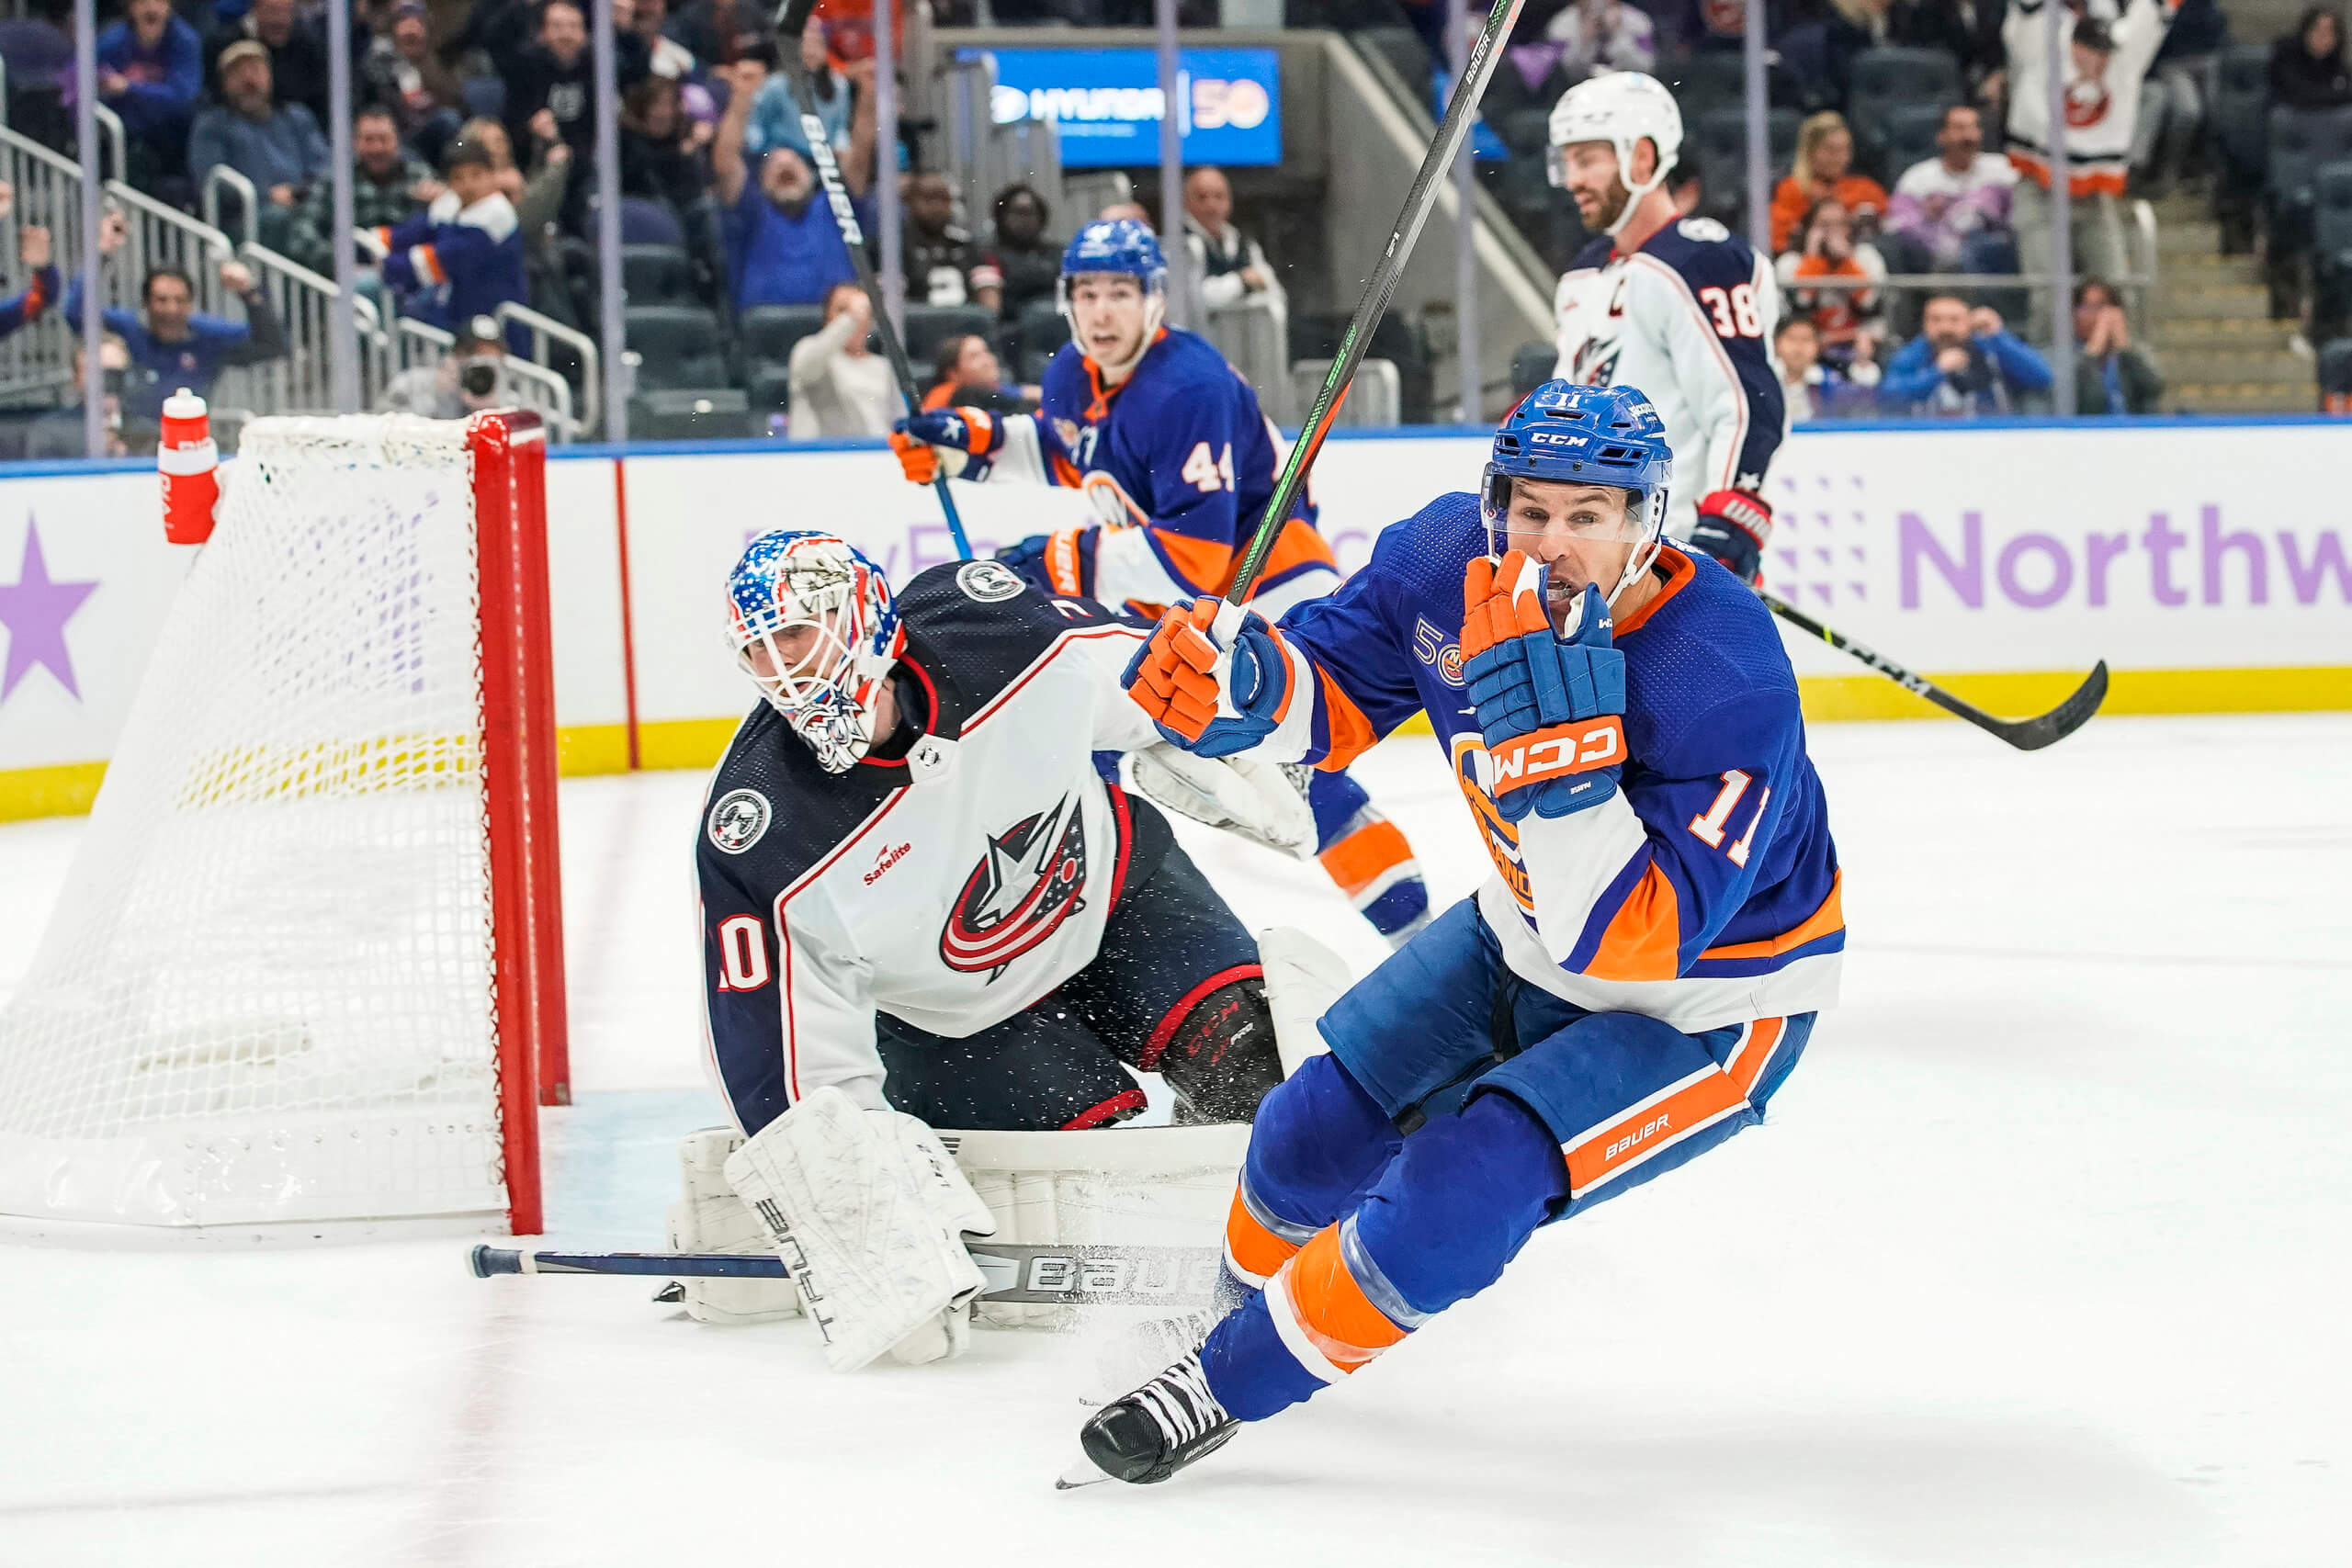 Parise Wanted Back By Islanders; Here's Why He's a Need - The